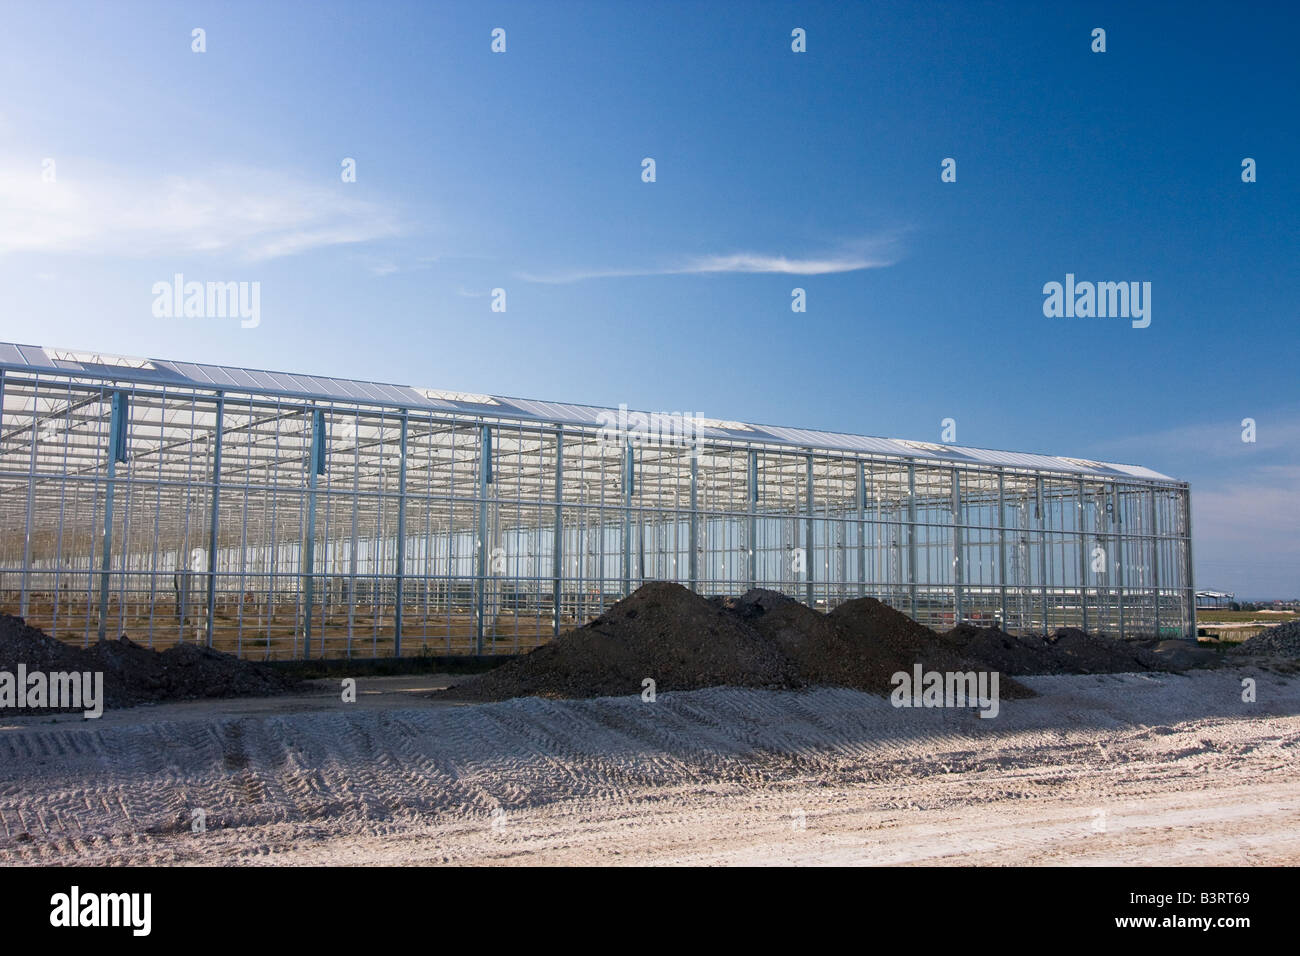 'Thanet Earth' Development Under Construction for Salad Crop Production, Thanet, Kent, England. Stock Photo